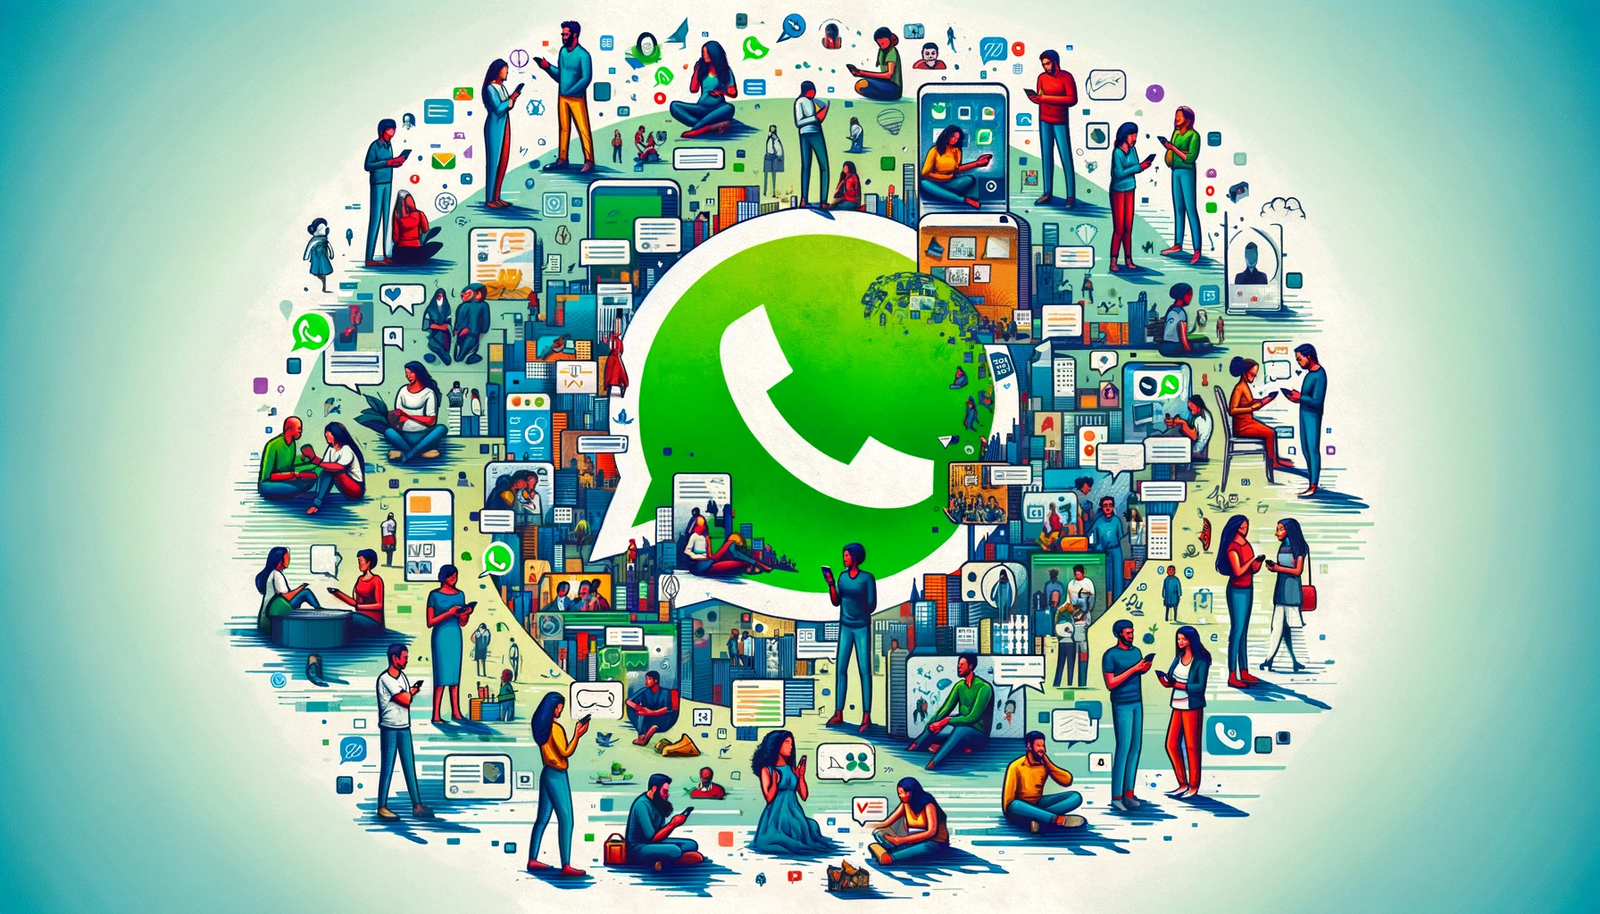 Artistic depiction of diverse societal groups engaged with WhatsApp, illustrating its profound influence on personal and professional relationships.